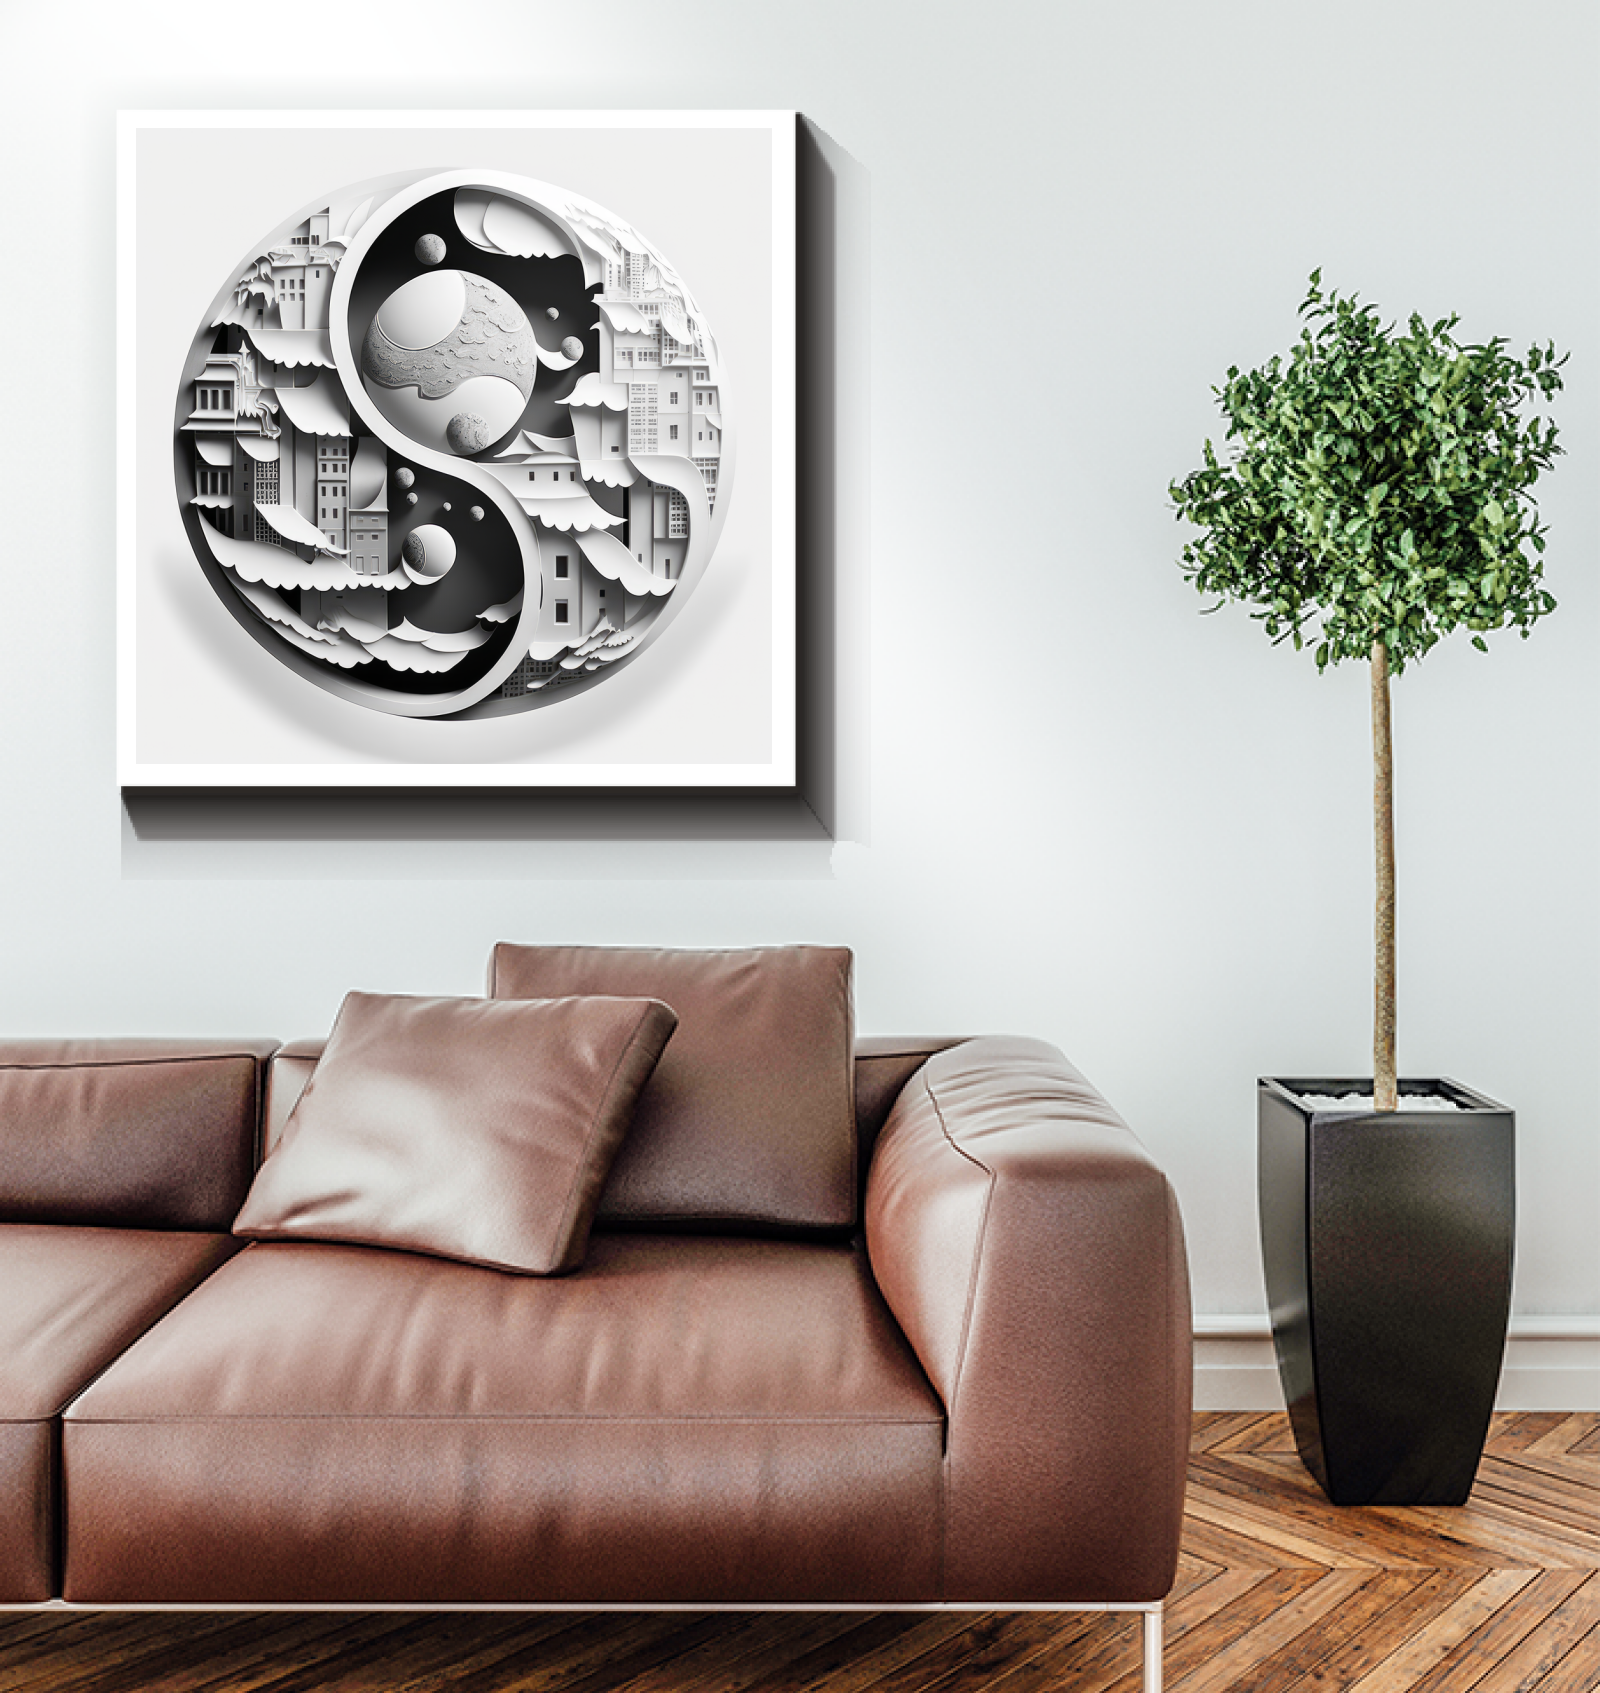 Decorative canvas with swirling artistic expressions.